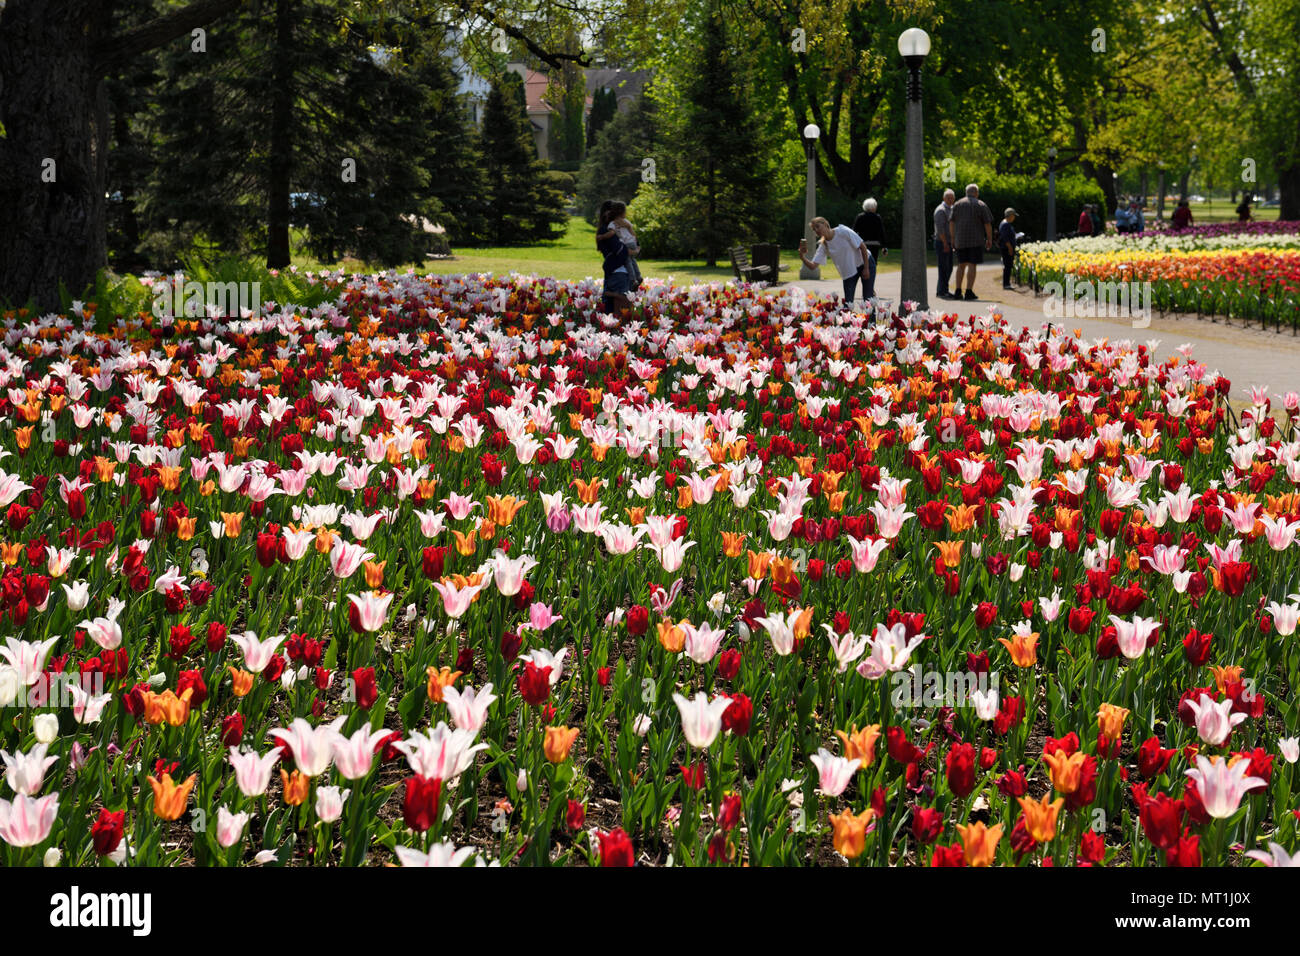 Visitors at Spring garden flower beds at Canadian Tulip Festival at Commissioners Park Dow's Lake Ottawa Canada Stock Photo